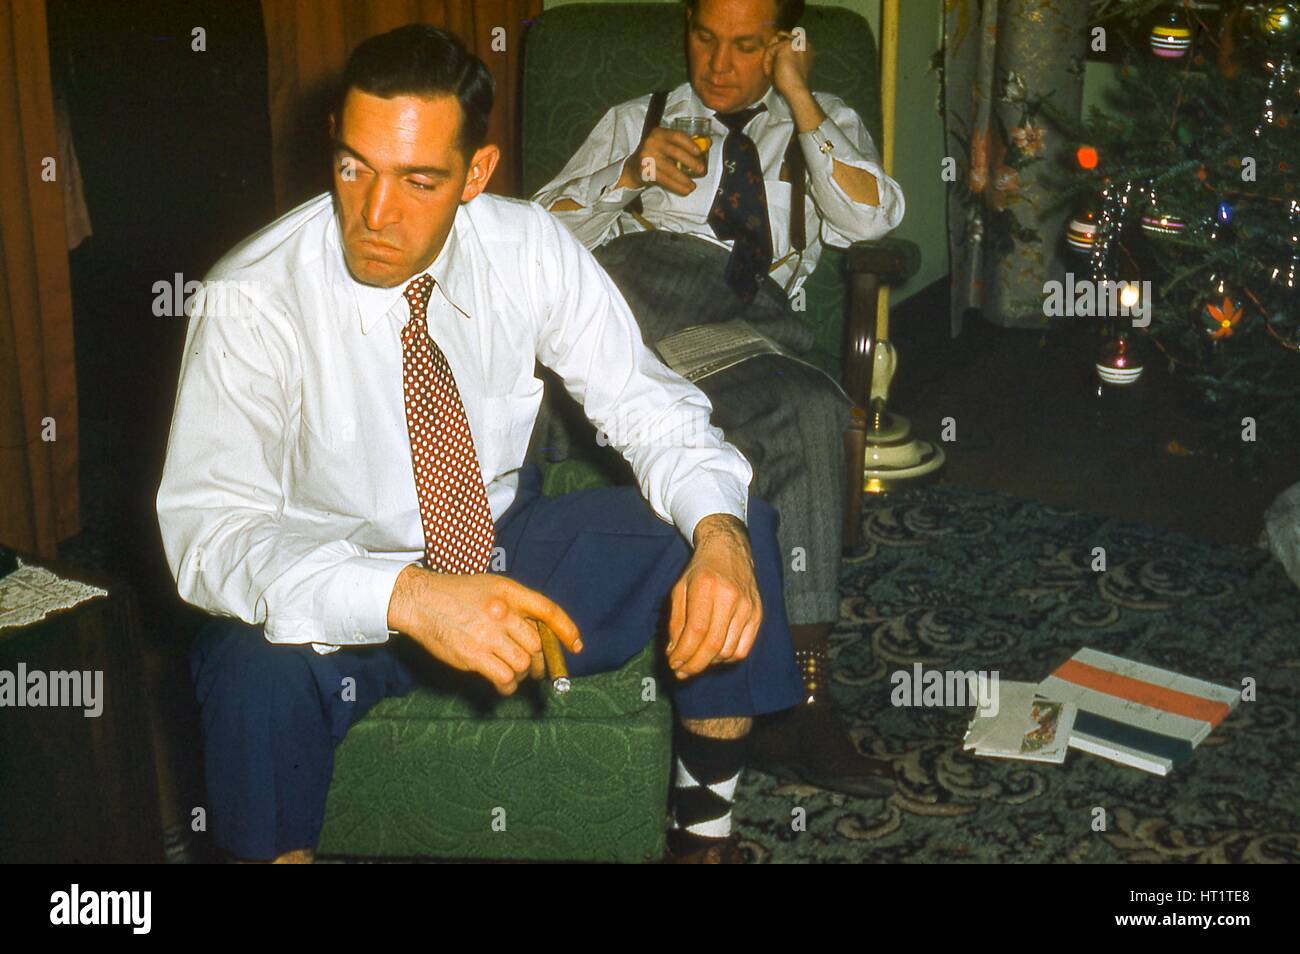 At Christmas, two men sit in a suburban living room near a Christmas tree, one drinking a cocktail, the other wearing a suit, smoking a cigar, and appearing bored, 1955. Stock Photo